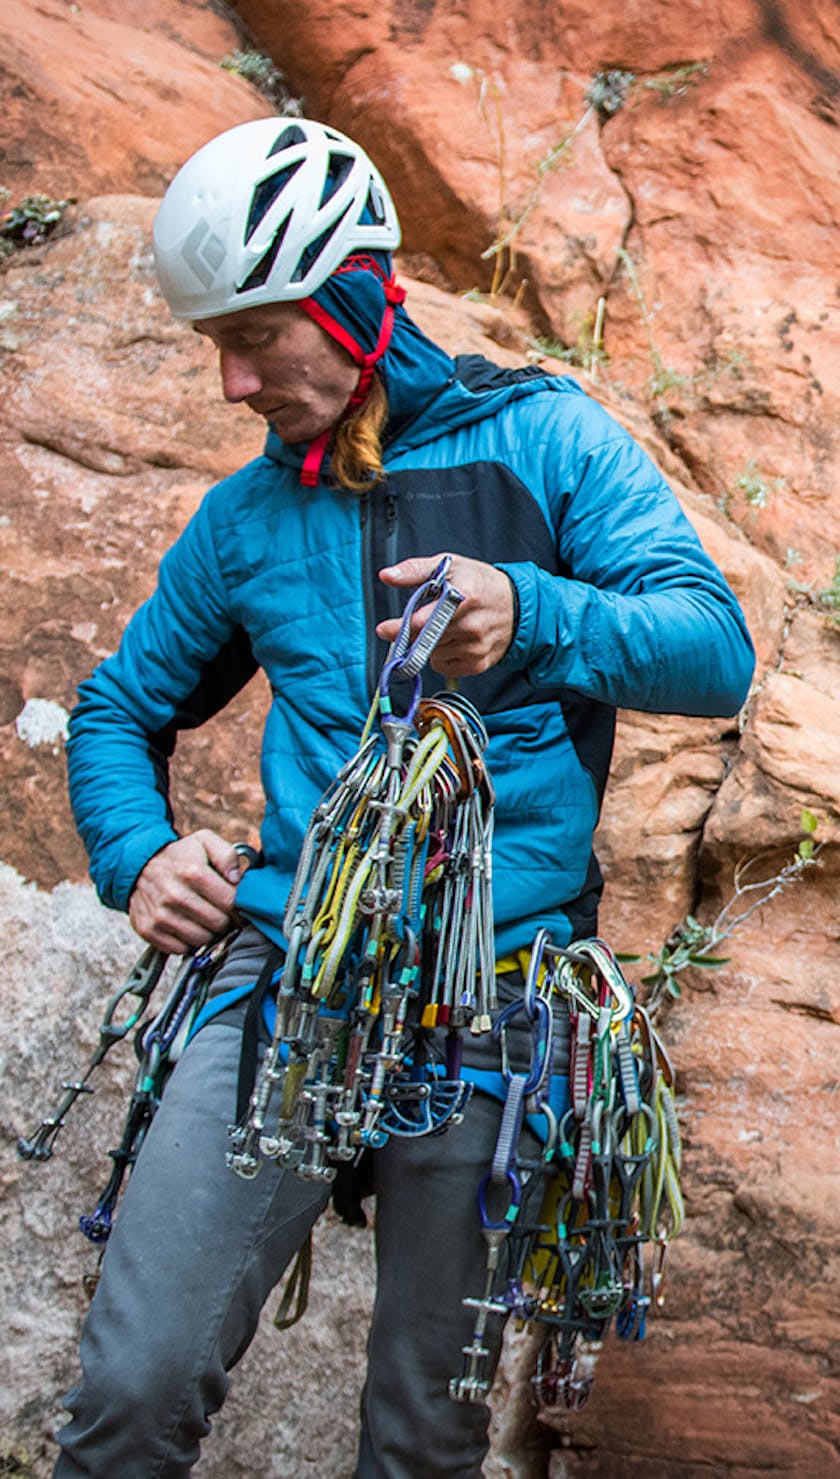 Photograph by Andy Earl of Big Wall Paul with rock climbing gear | gear loops